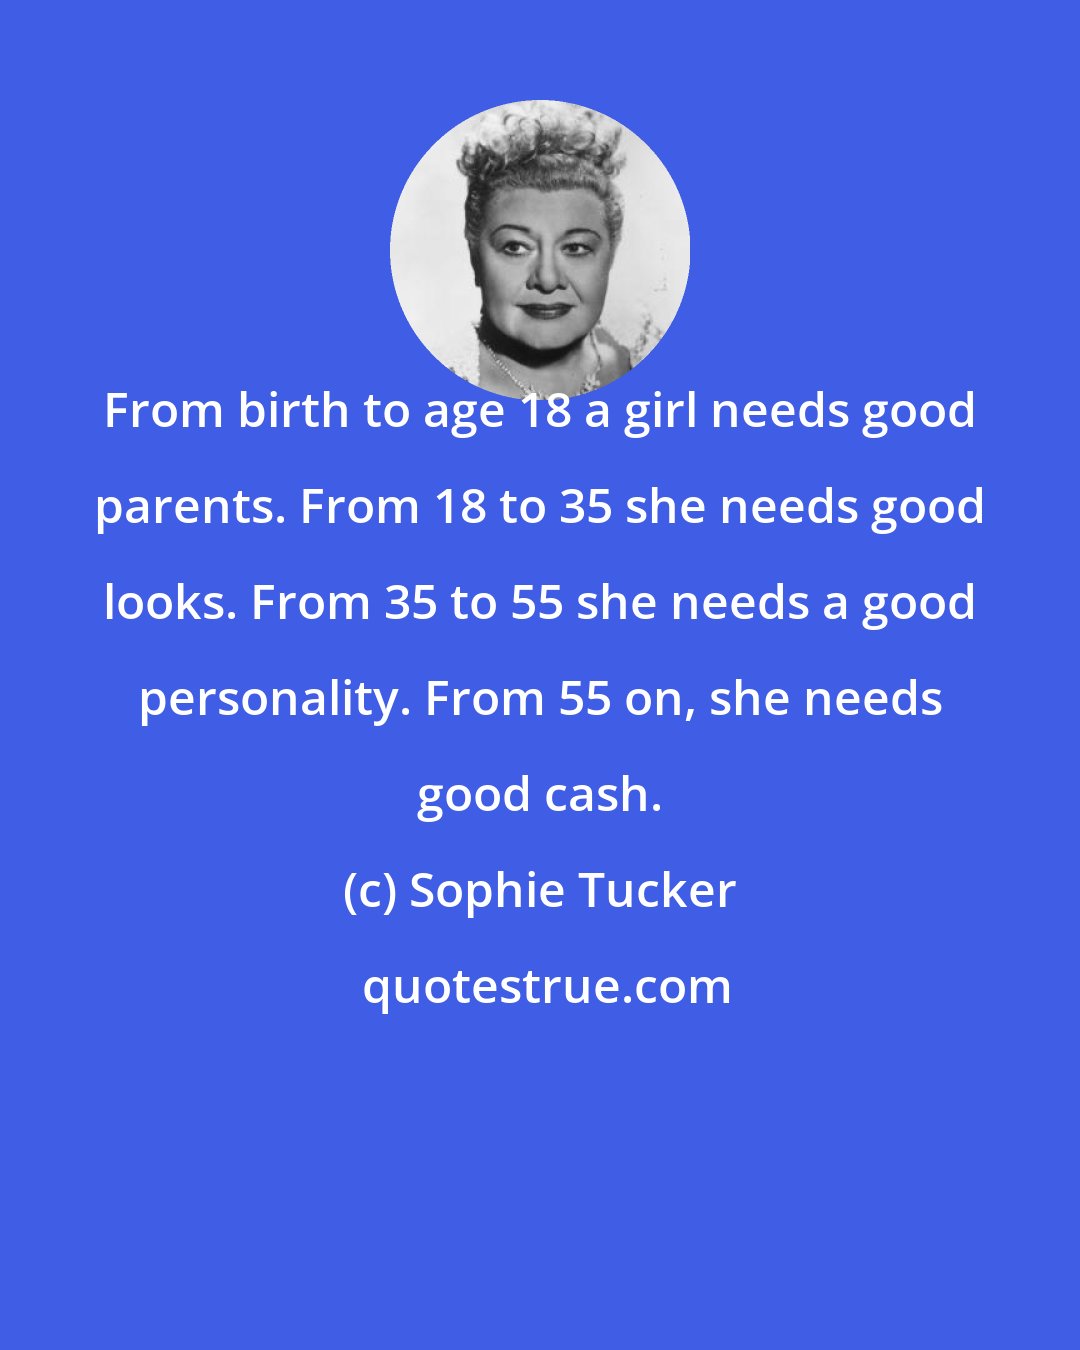 Sophie Tucker: From birth to age 18 a girl needs good parents. From 18 to 35 she needs good looks. From 35 to 55 she needs a good personality. From 55 on, she needs good cash.